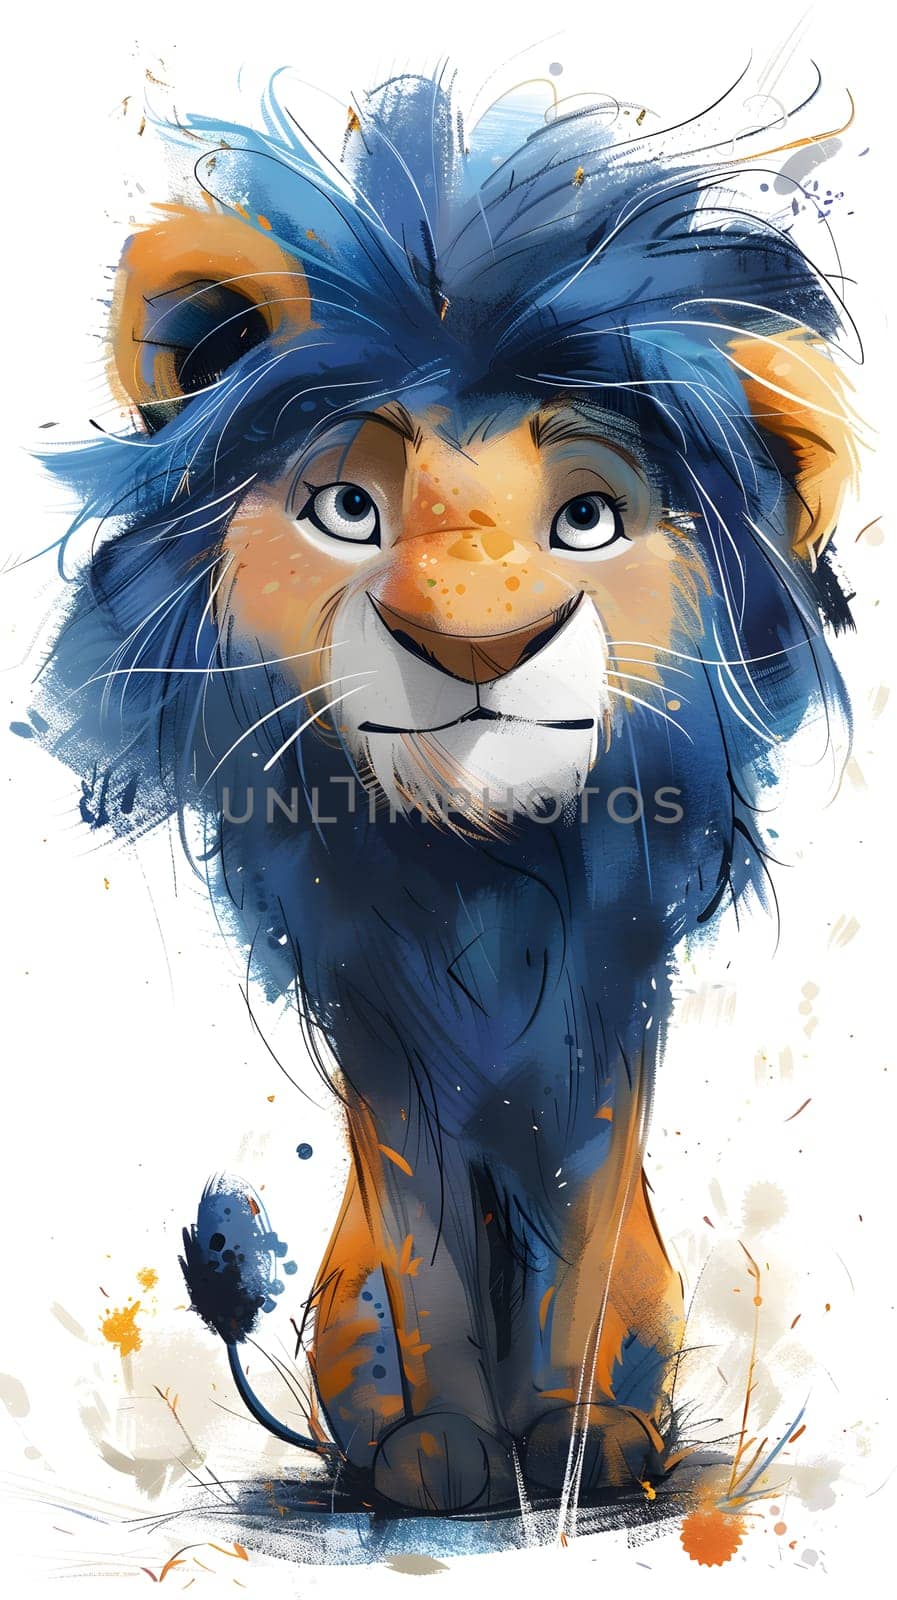 An illustration of a fictional character, a cartoon lion with electric blue mane, standing on a white background. The painting features detailed fur, expressive snout, and vibrant colors